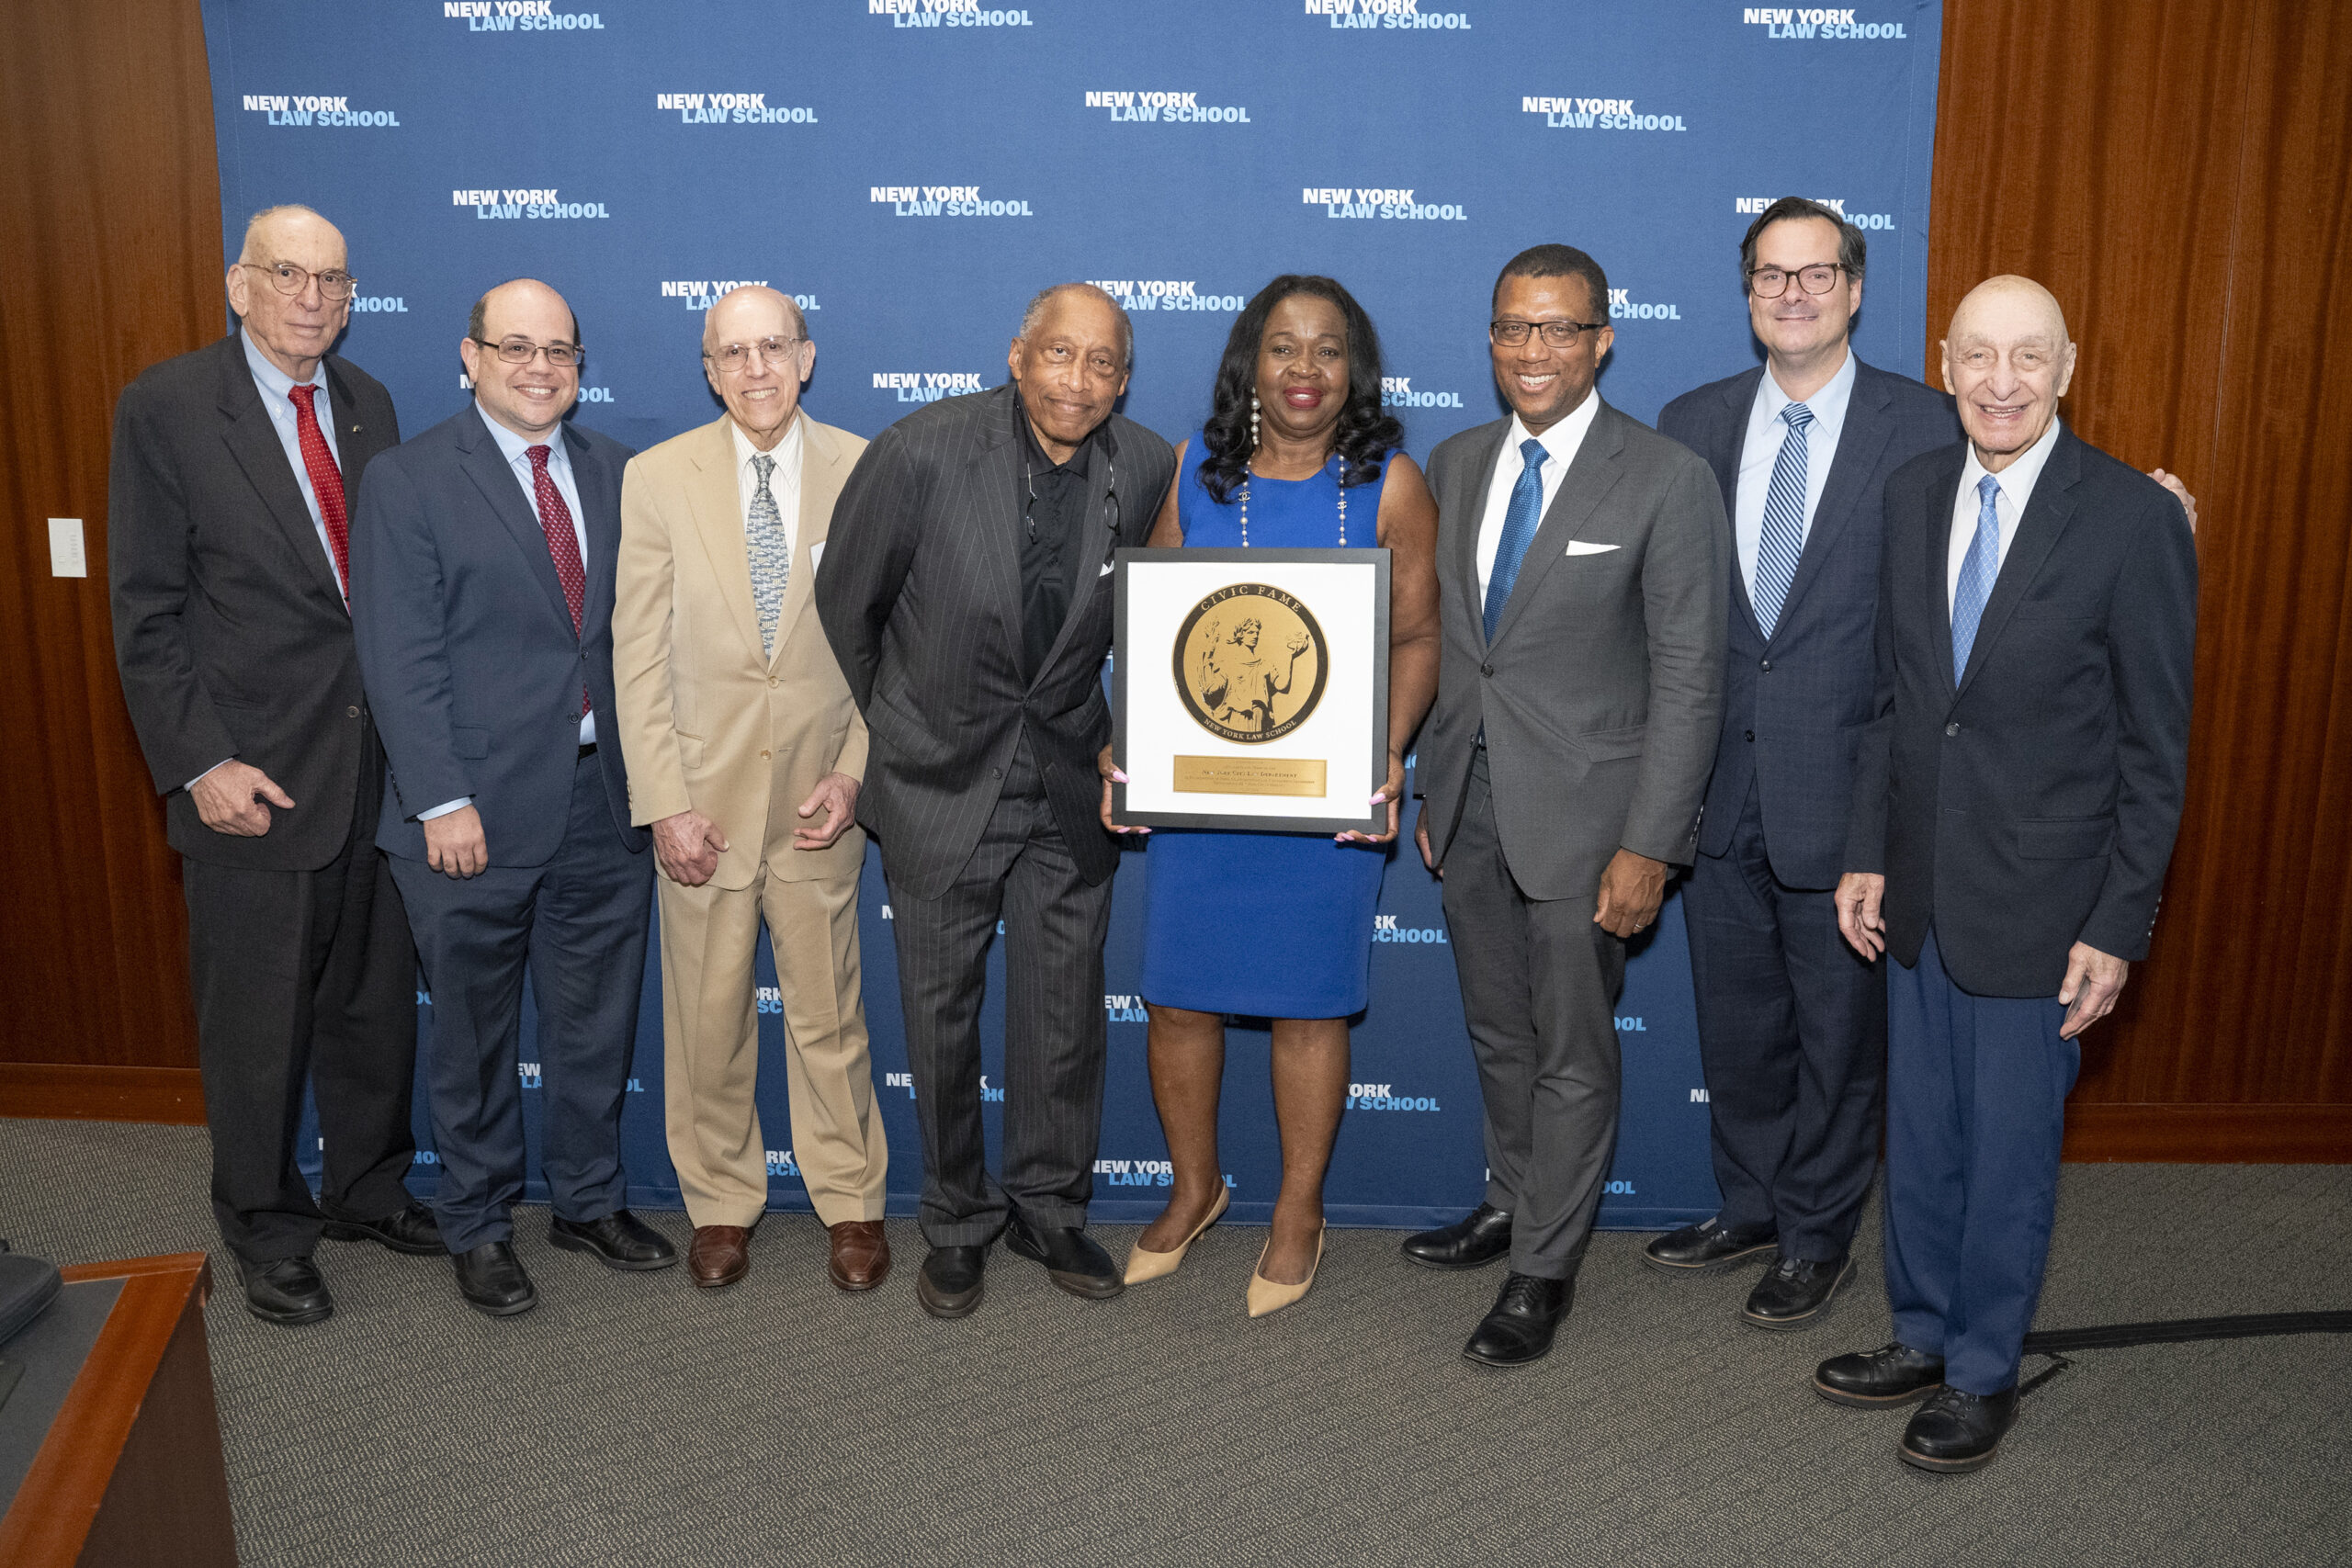 At the Civic Fame Award ceremony (pictured from left to right): Ross Sandler, director of New York Law School’s Center for NYC Law; Eric Eichenholtz, NYC Law Department managing attorney; former Corporation Counsels Michael Cardozo, Zachary Carter, Sylvia Hinds-Radix and Jim Johnson; Anthony Crowell, New York Law School dean and president; and Arthur Abbey, New York Law School Class of 1959, and chair of the New York Law School Board of Trustees. Photo courtesy of the NY Law Department